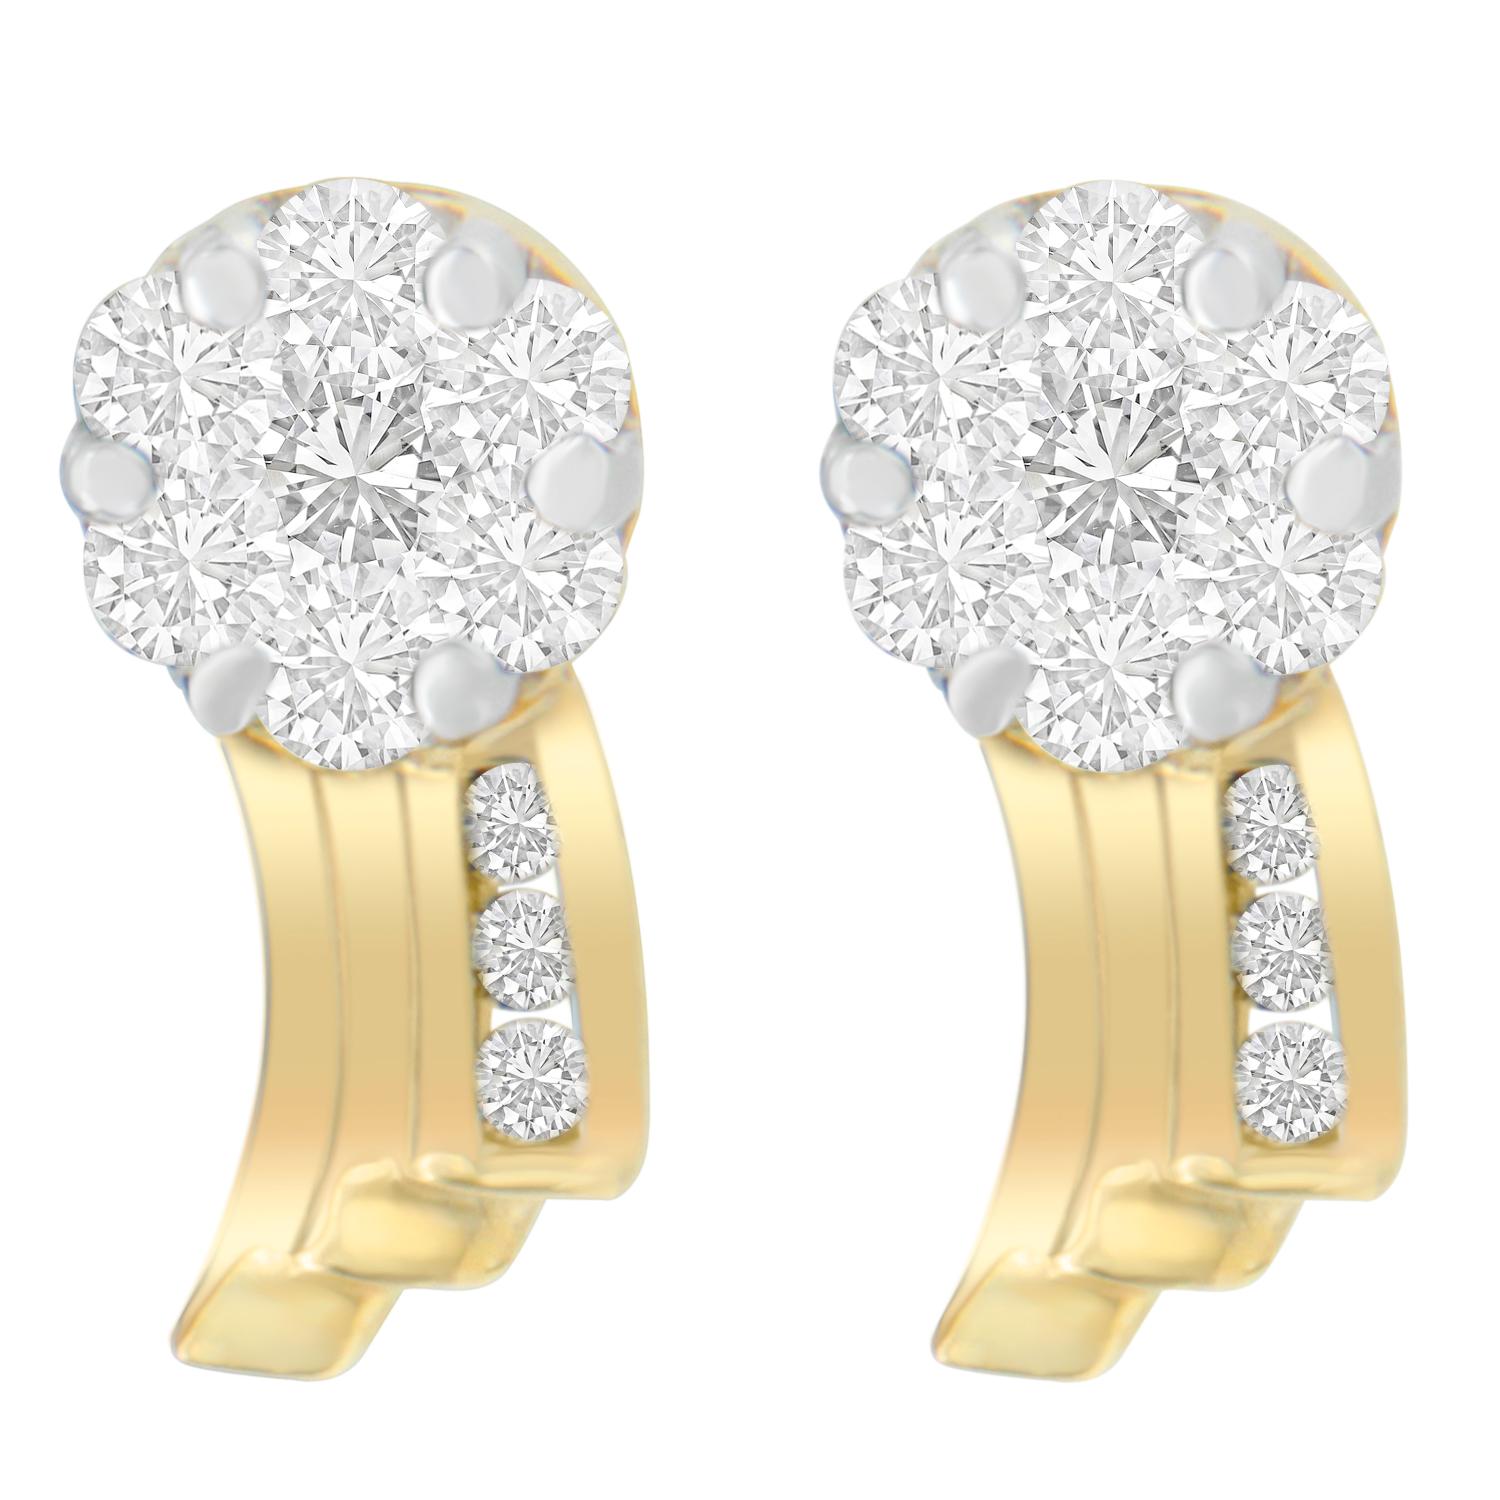 Inspiring vintage details with heirloom styles these stylish earrings are sure to cherish every onlooker. Chisel to perfection, the earrings are constructed of 14 karats yellow gold and buffed to a luster with brilliance. Representing a stunning